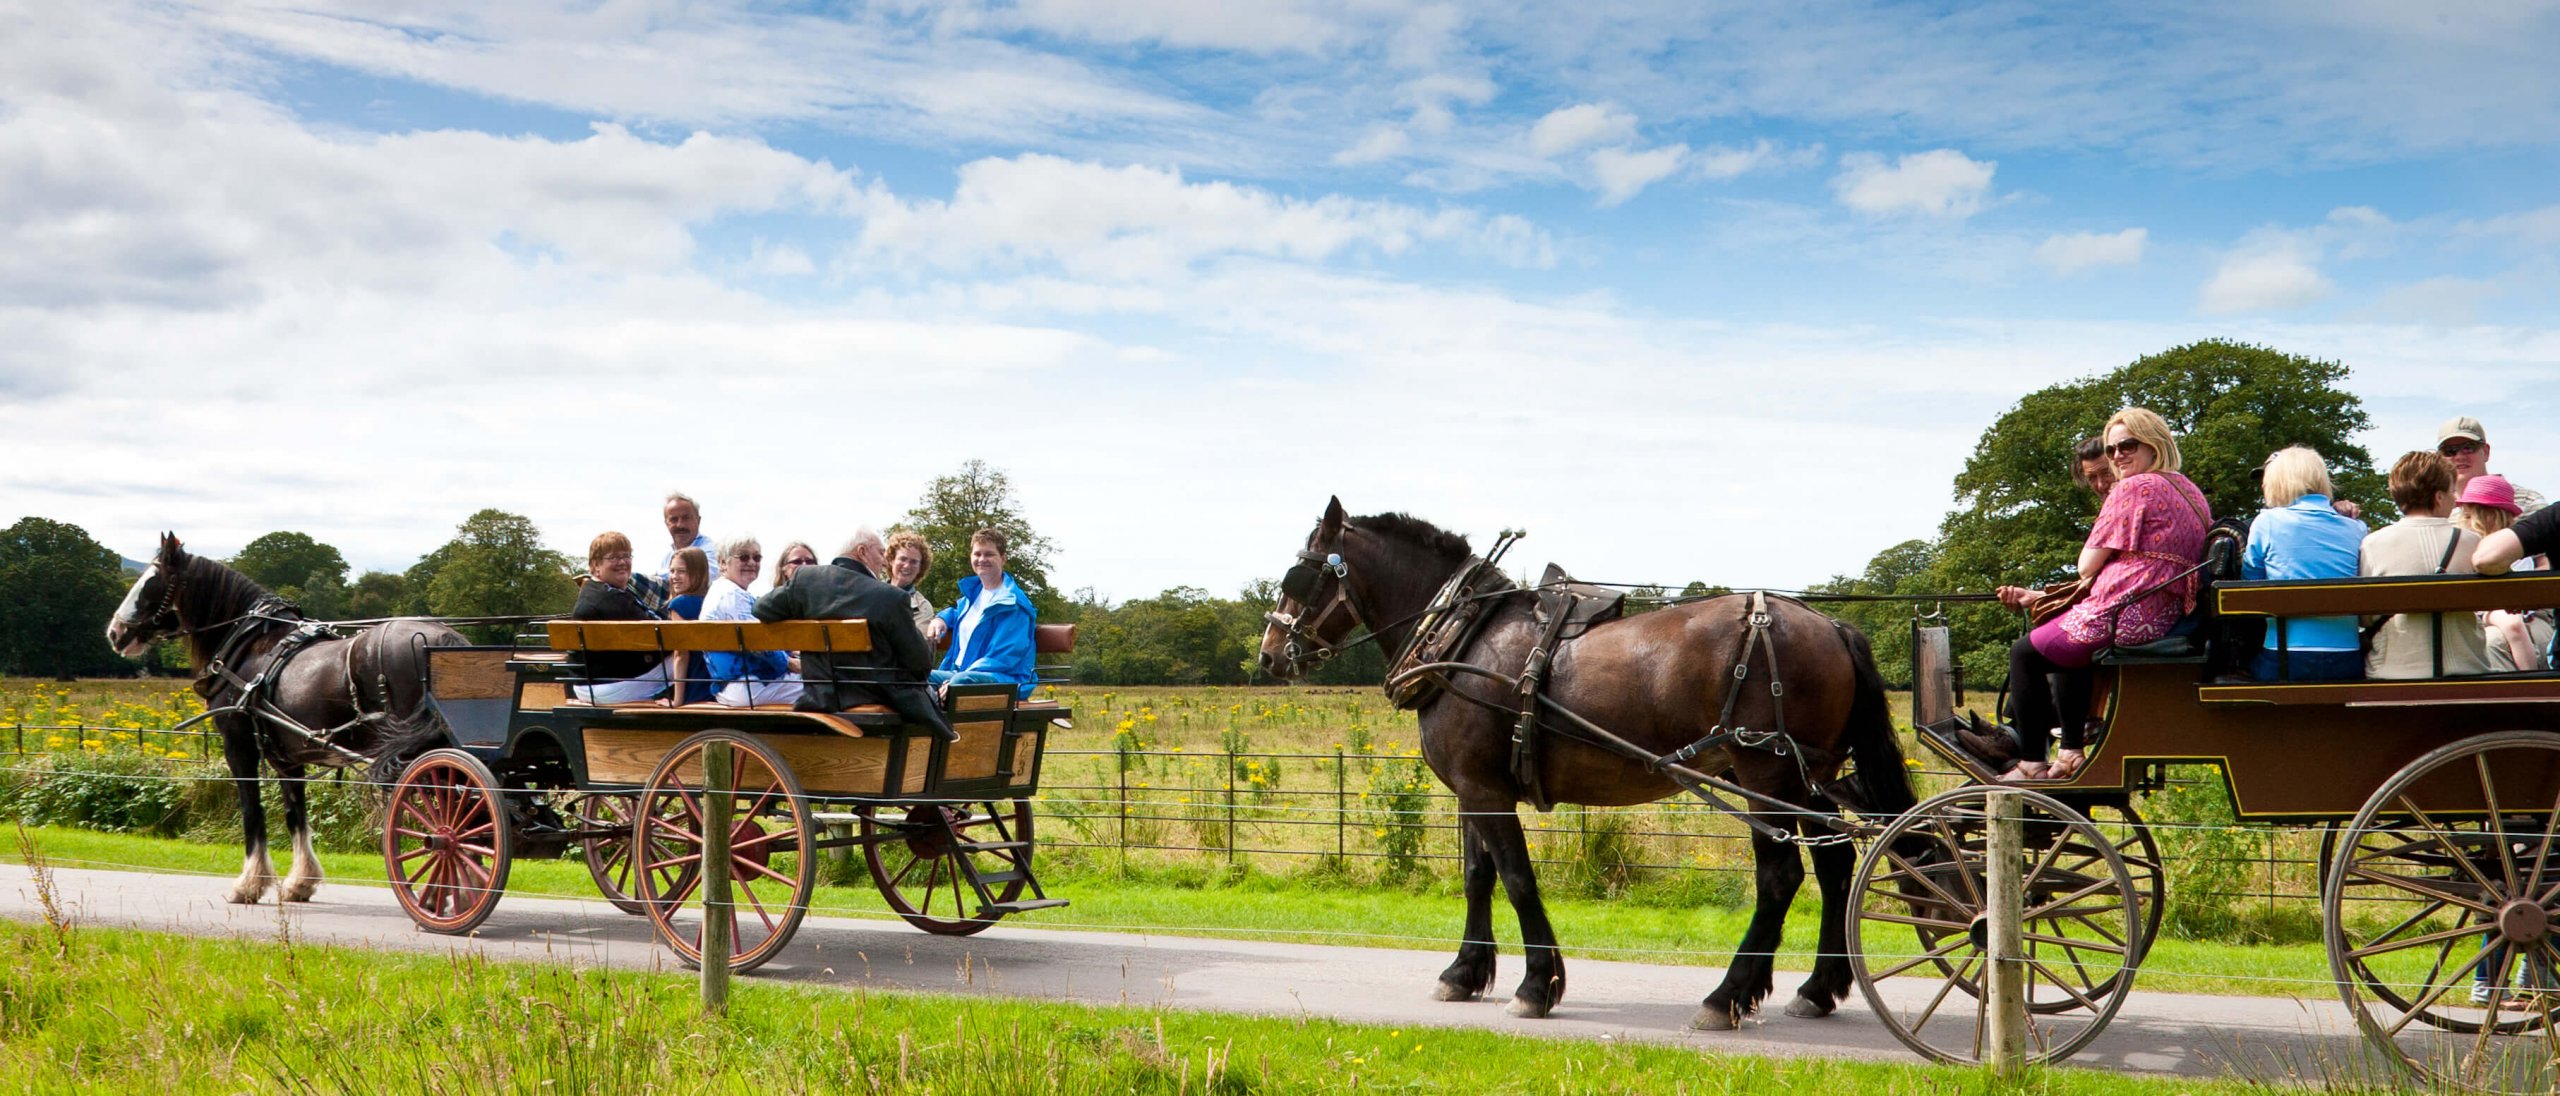 Two horse-drawn jaunting carriages in Killarney National Park, Ireland